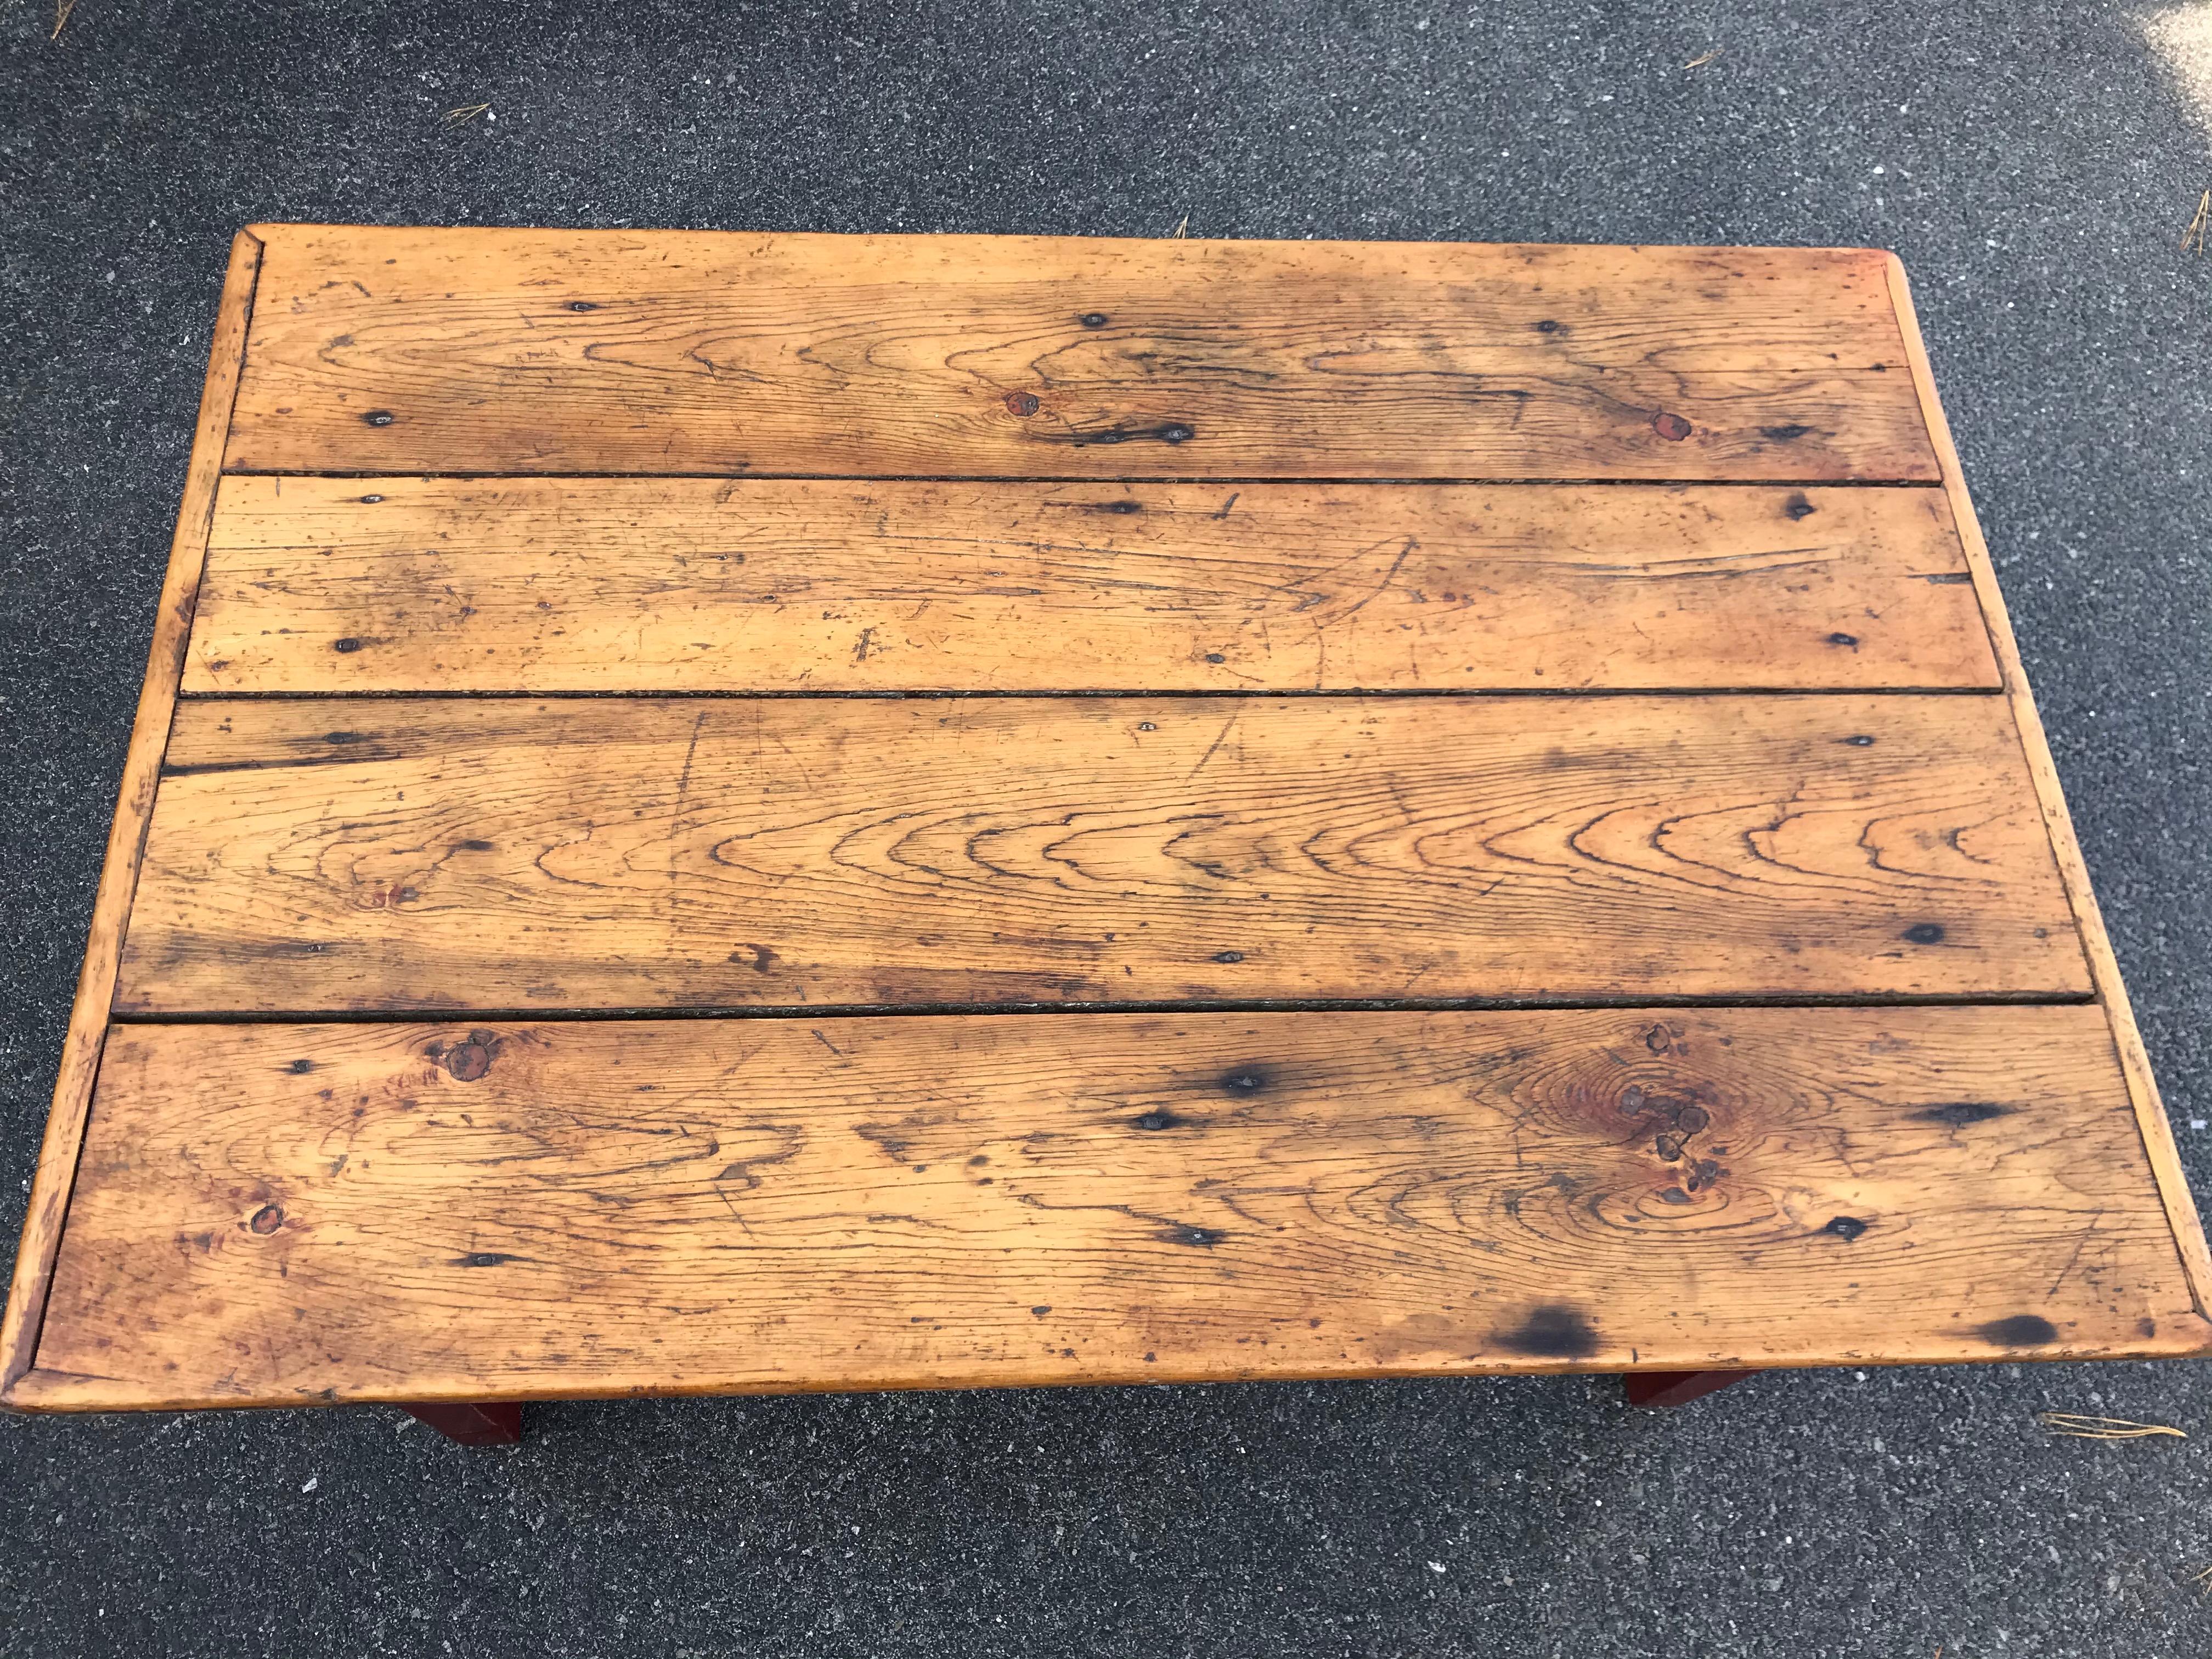 Lovely 19th century table cut down to coffee table height. With four board top in natural finish and red painted base. Canada, likely Newfoundland.